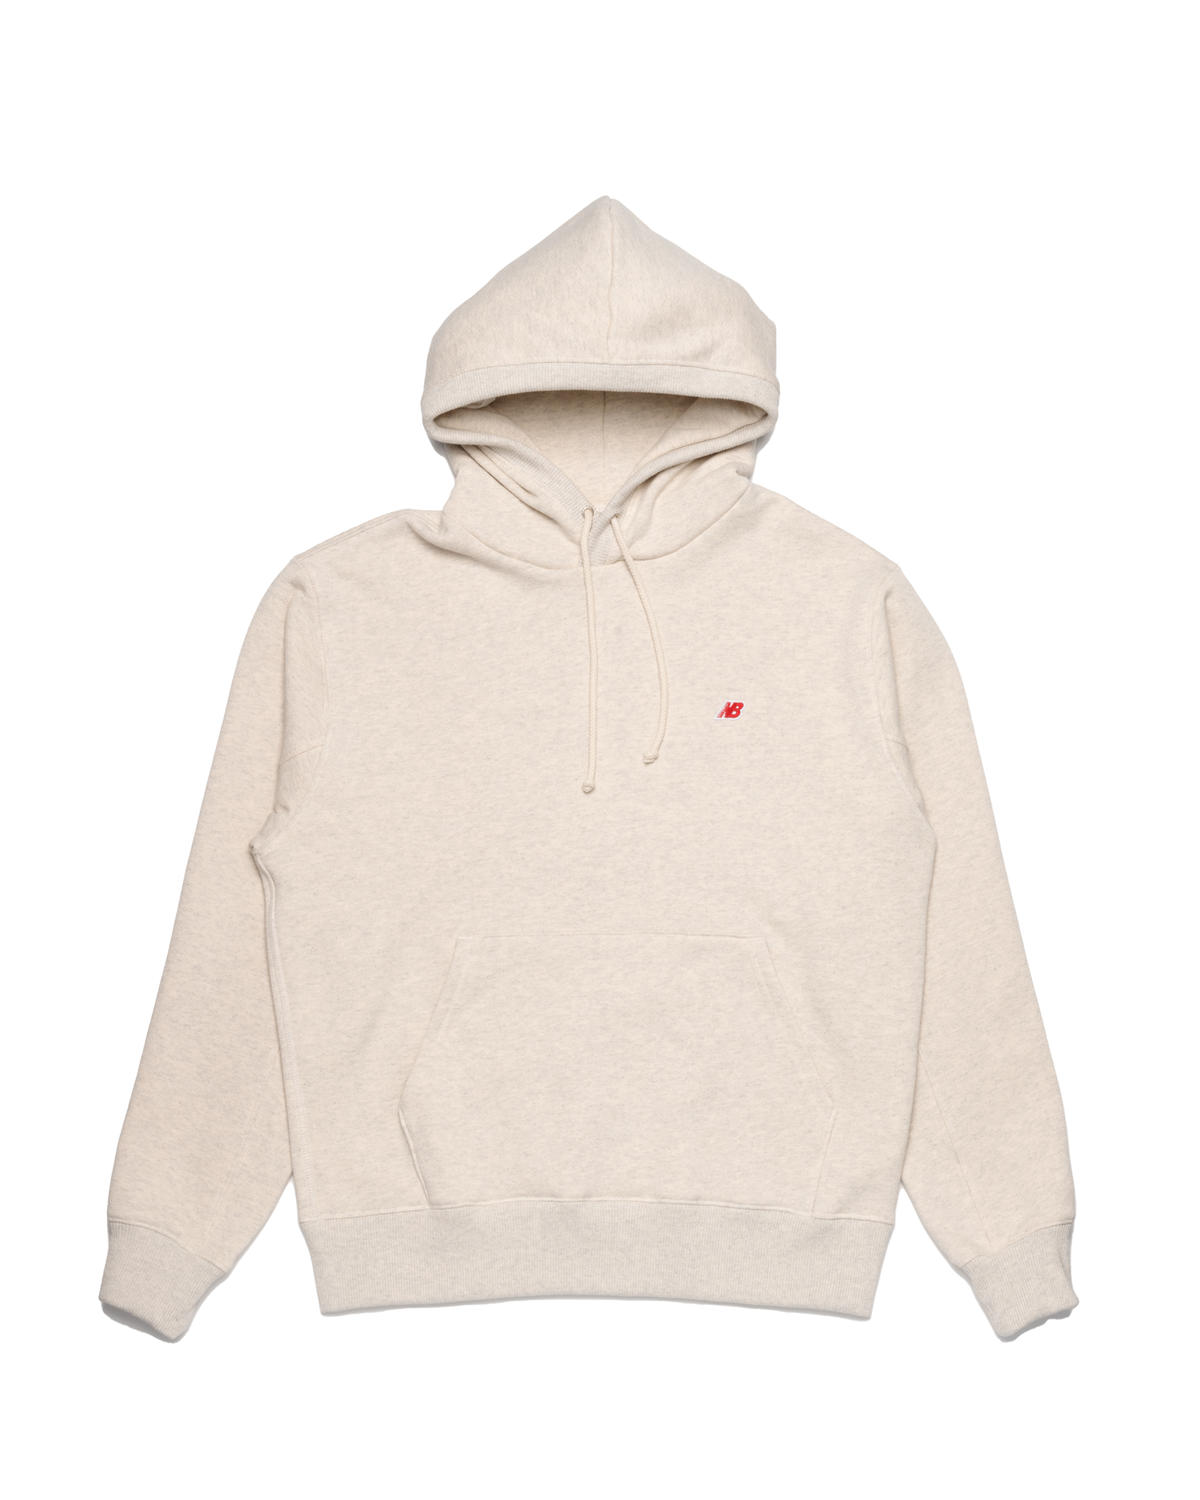 New Balance Made in USA Hoodie | MT21540_OTH | AFEW STORE